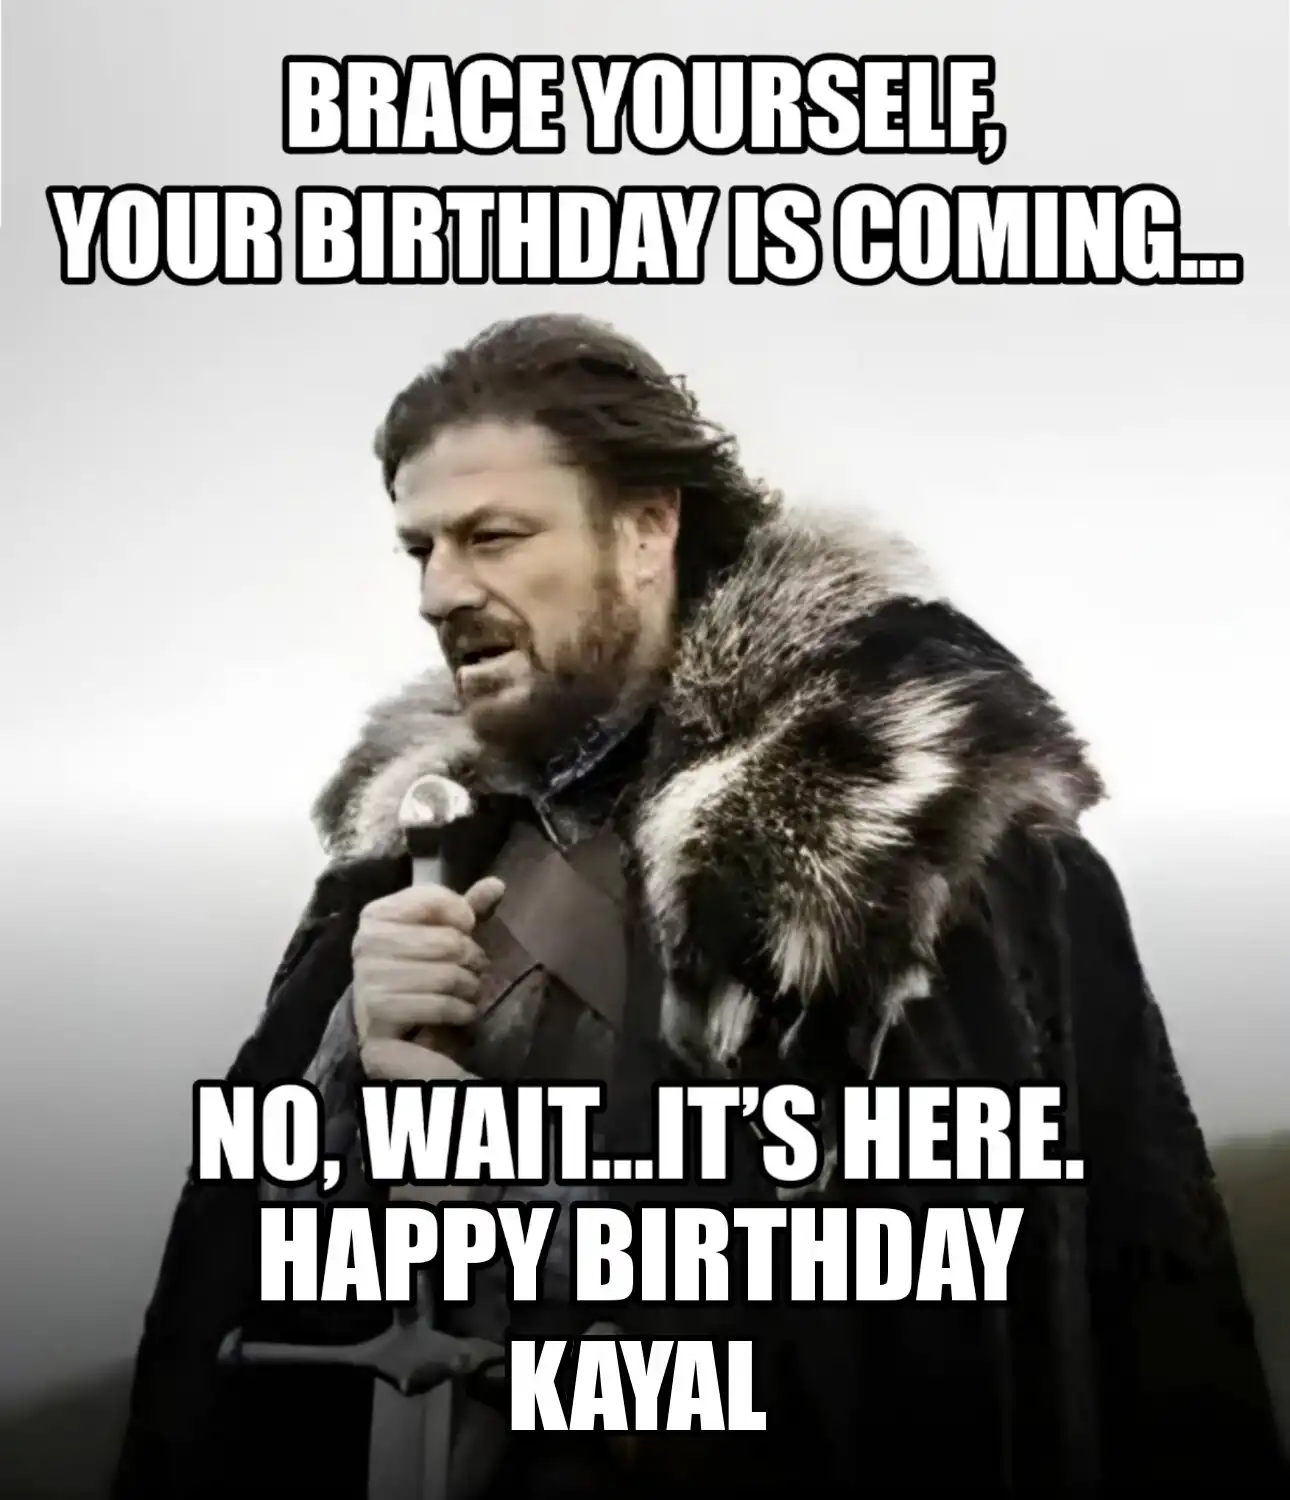 Happy Birthday Kayal Brace Yourself Your Birthday Is Coming Meme